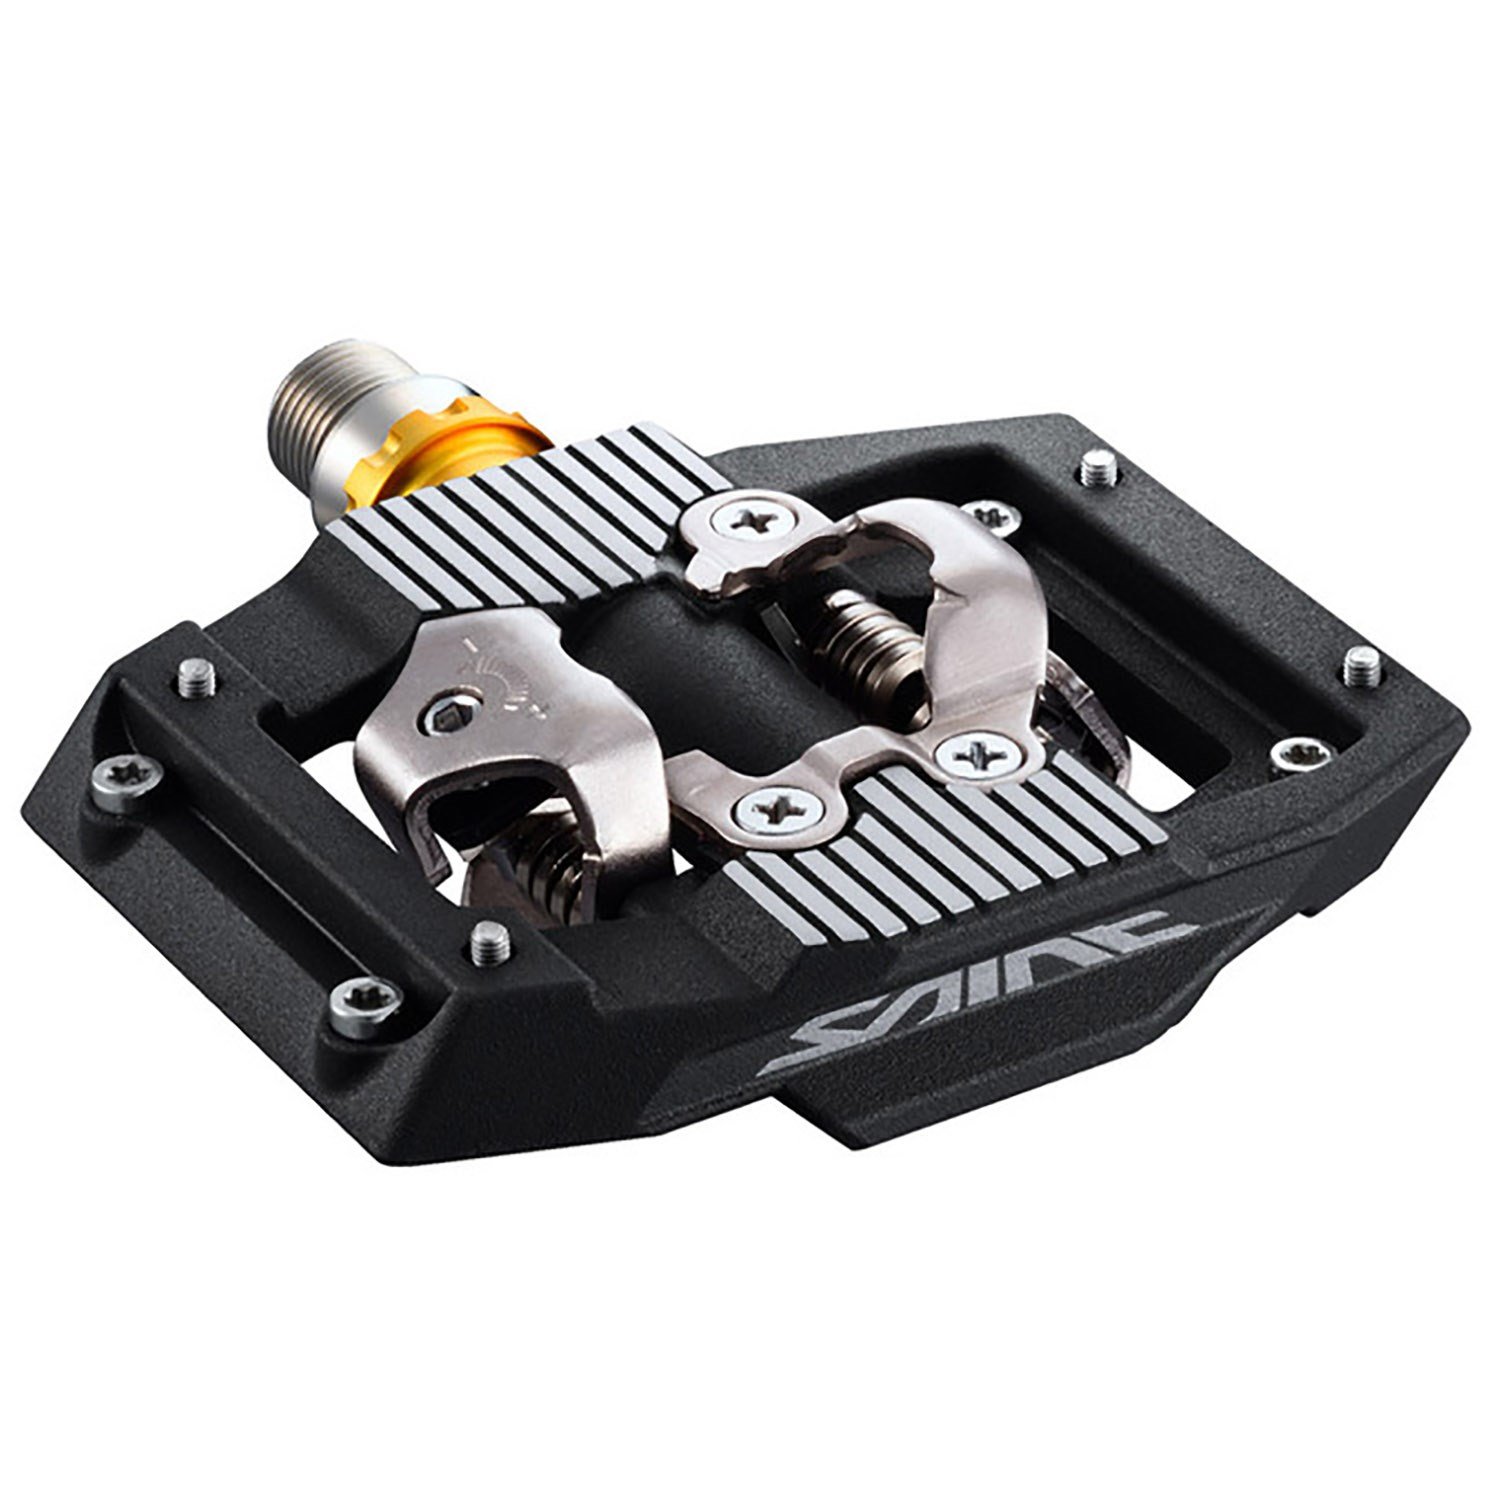 downhill clipless pedals